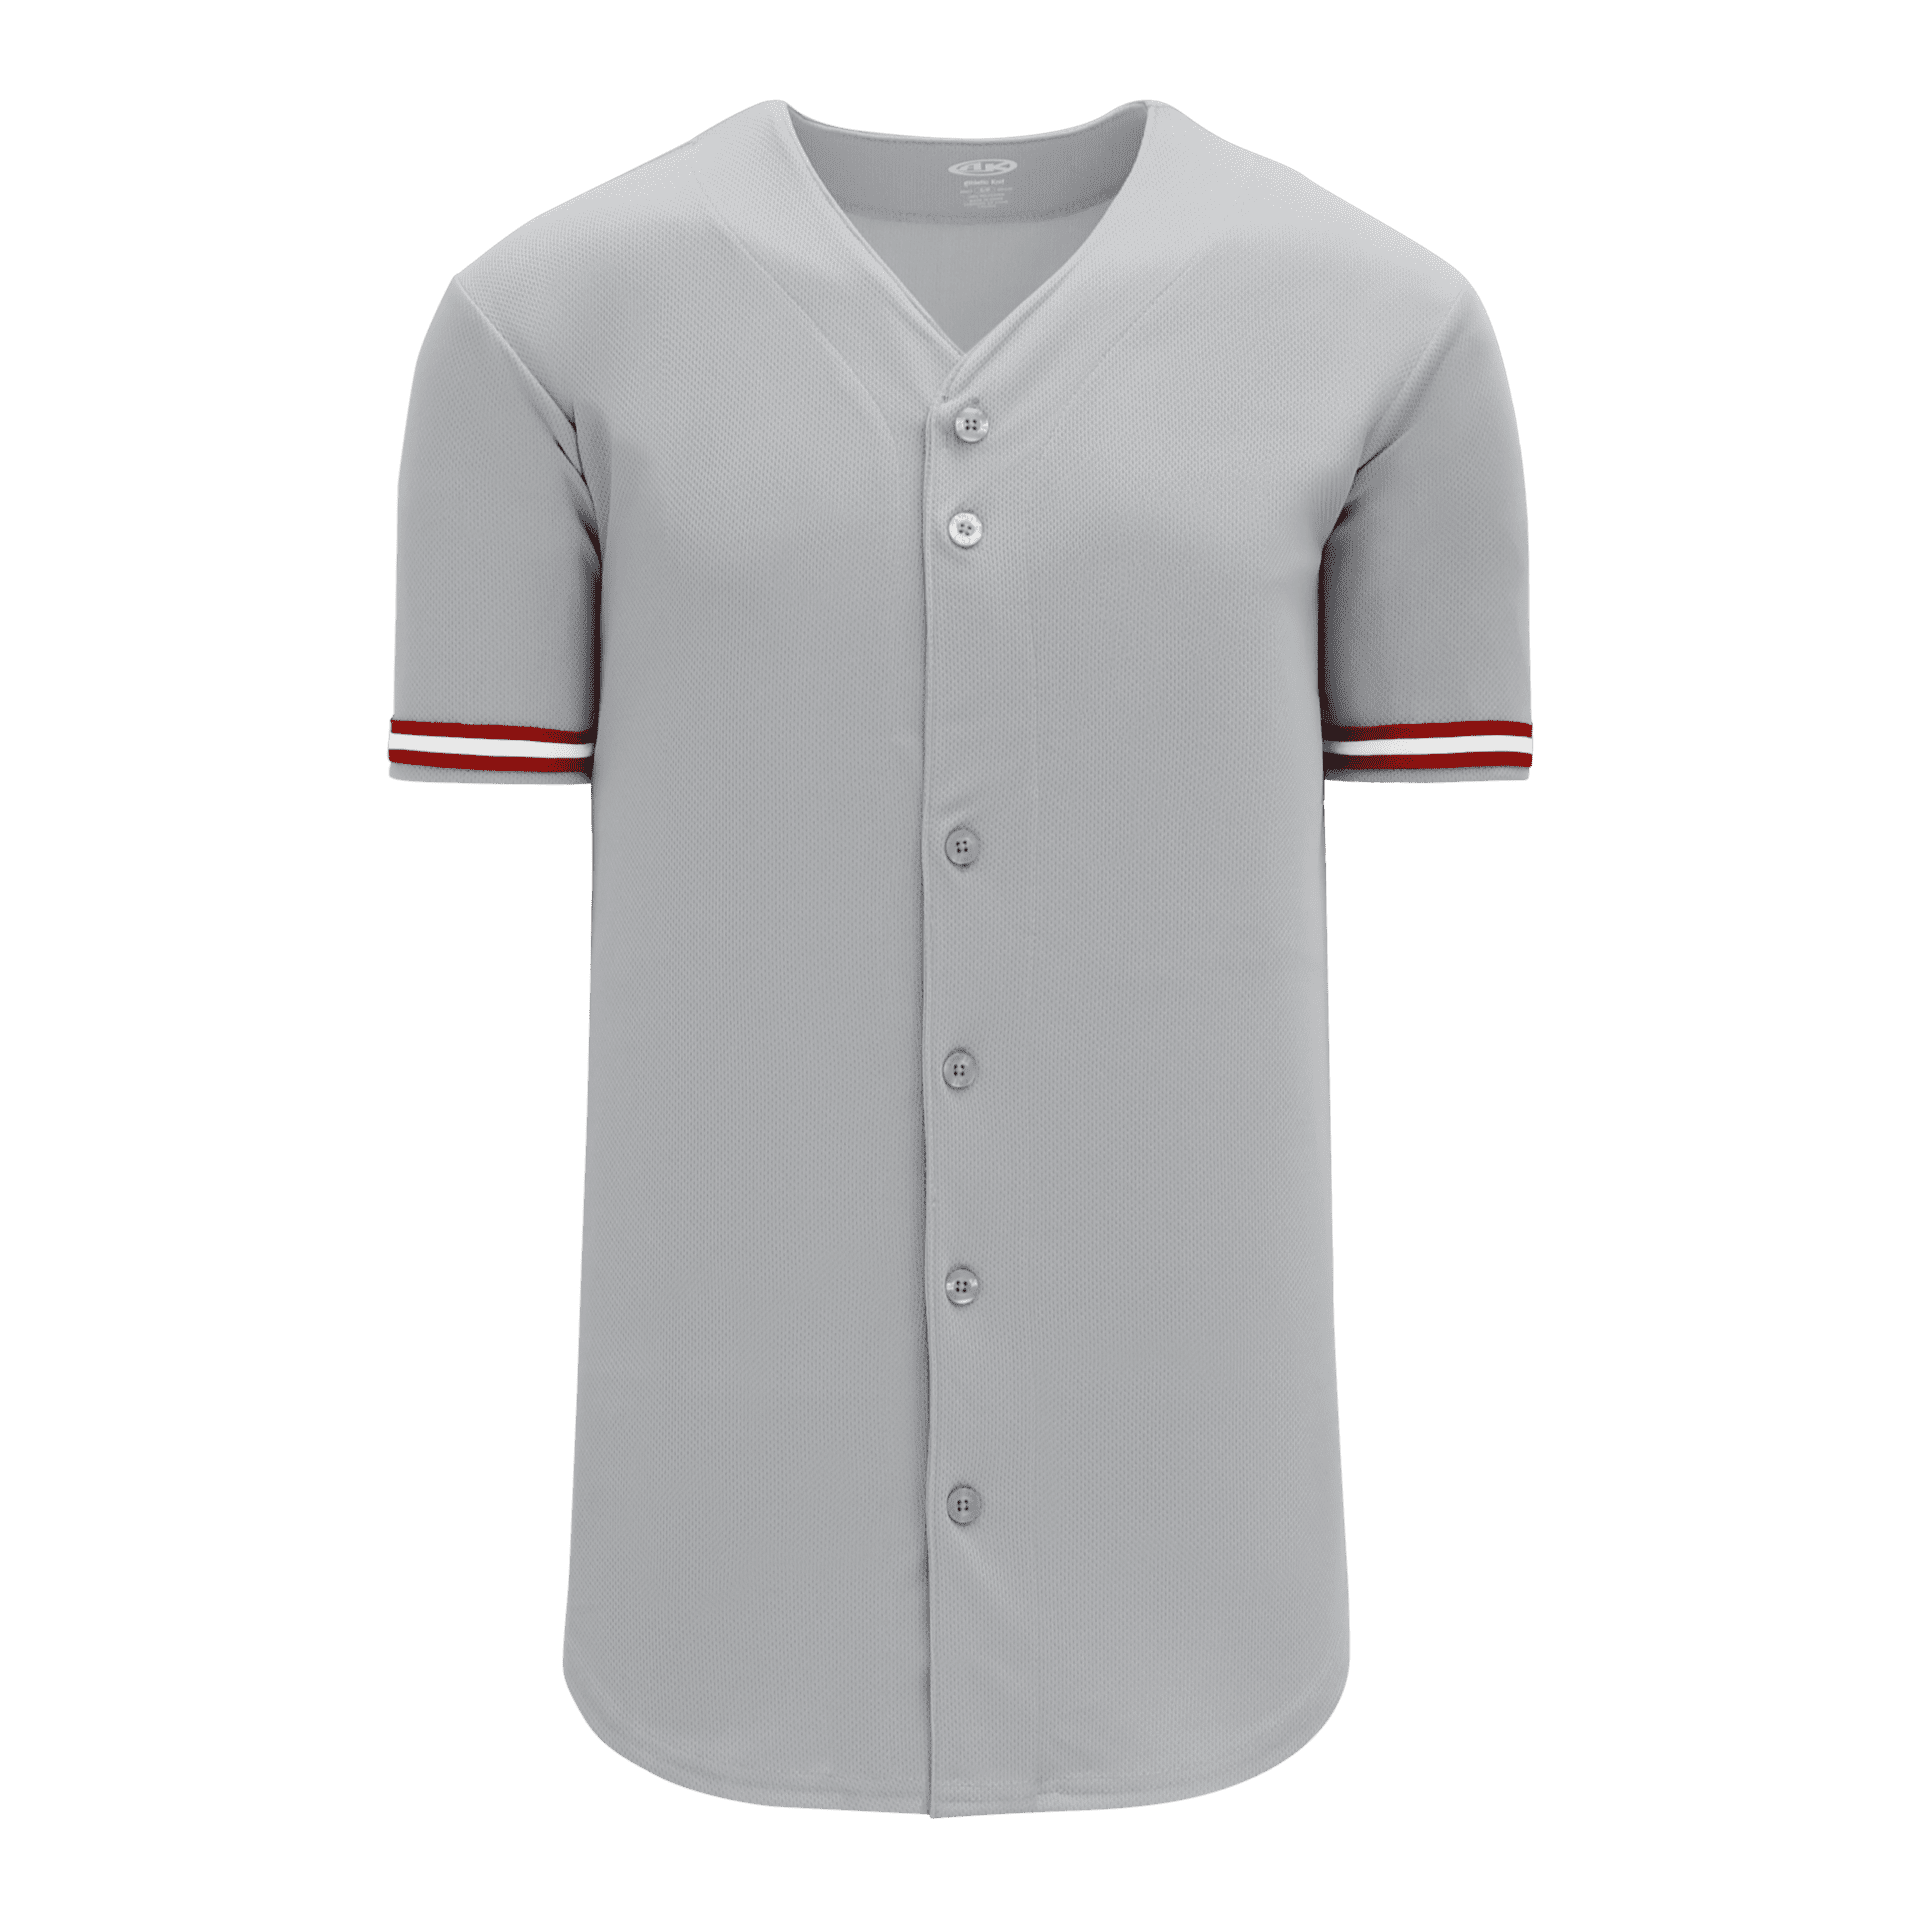 ATHLETIC KNIT FULL BUTTON BASEBALL JERSEY #BA5500 Grey / Red / White